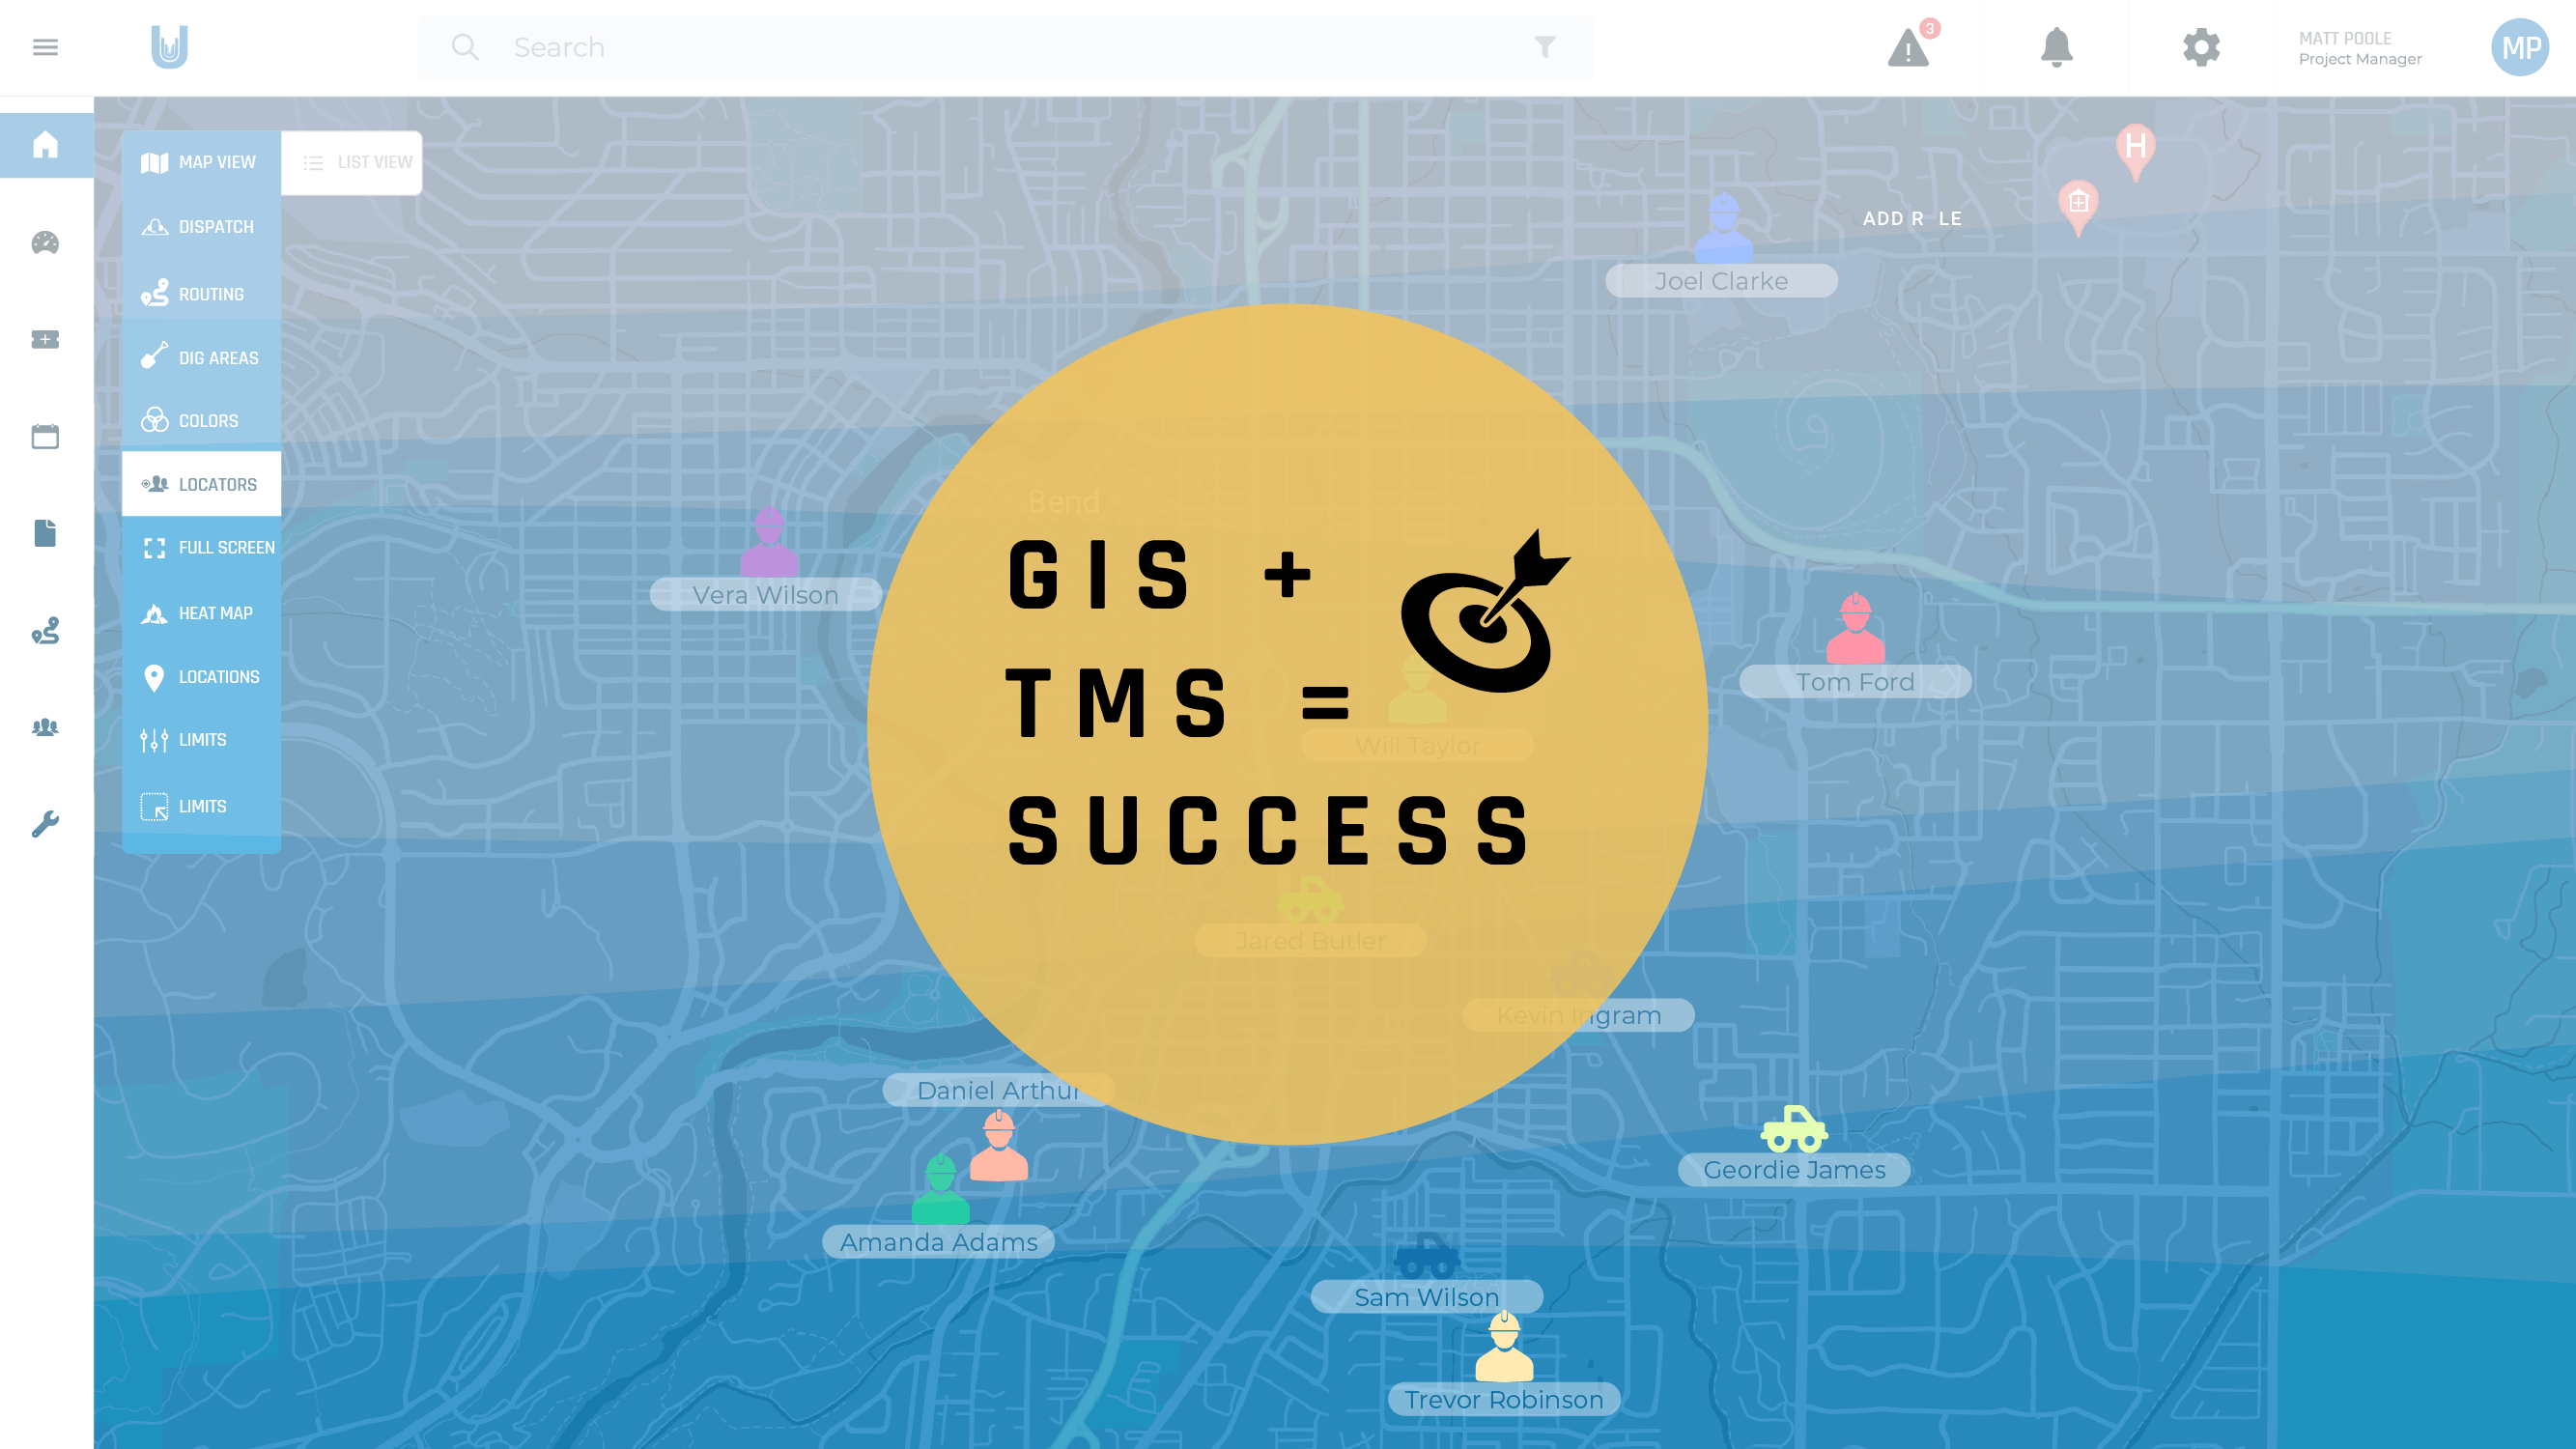 Featured image for “GIS + TMS = SUCCESS”